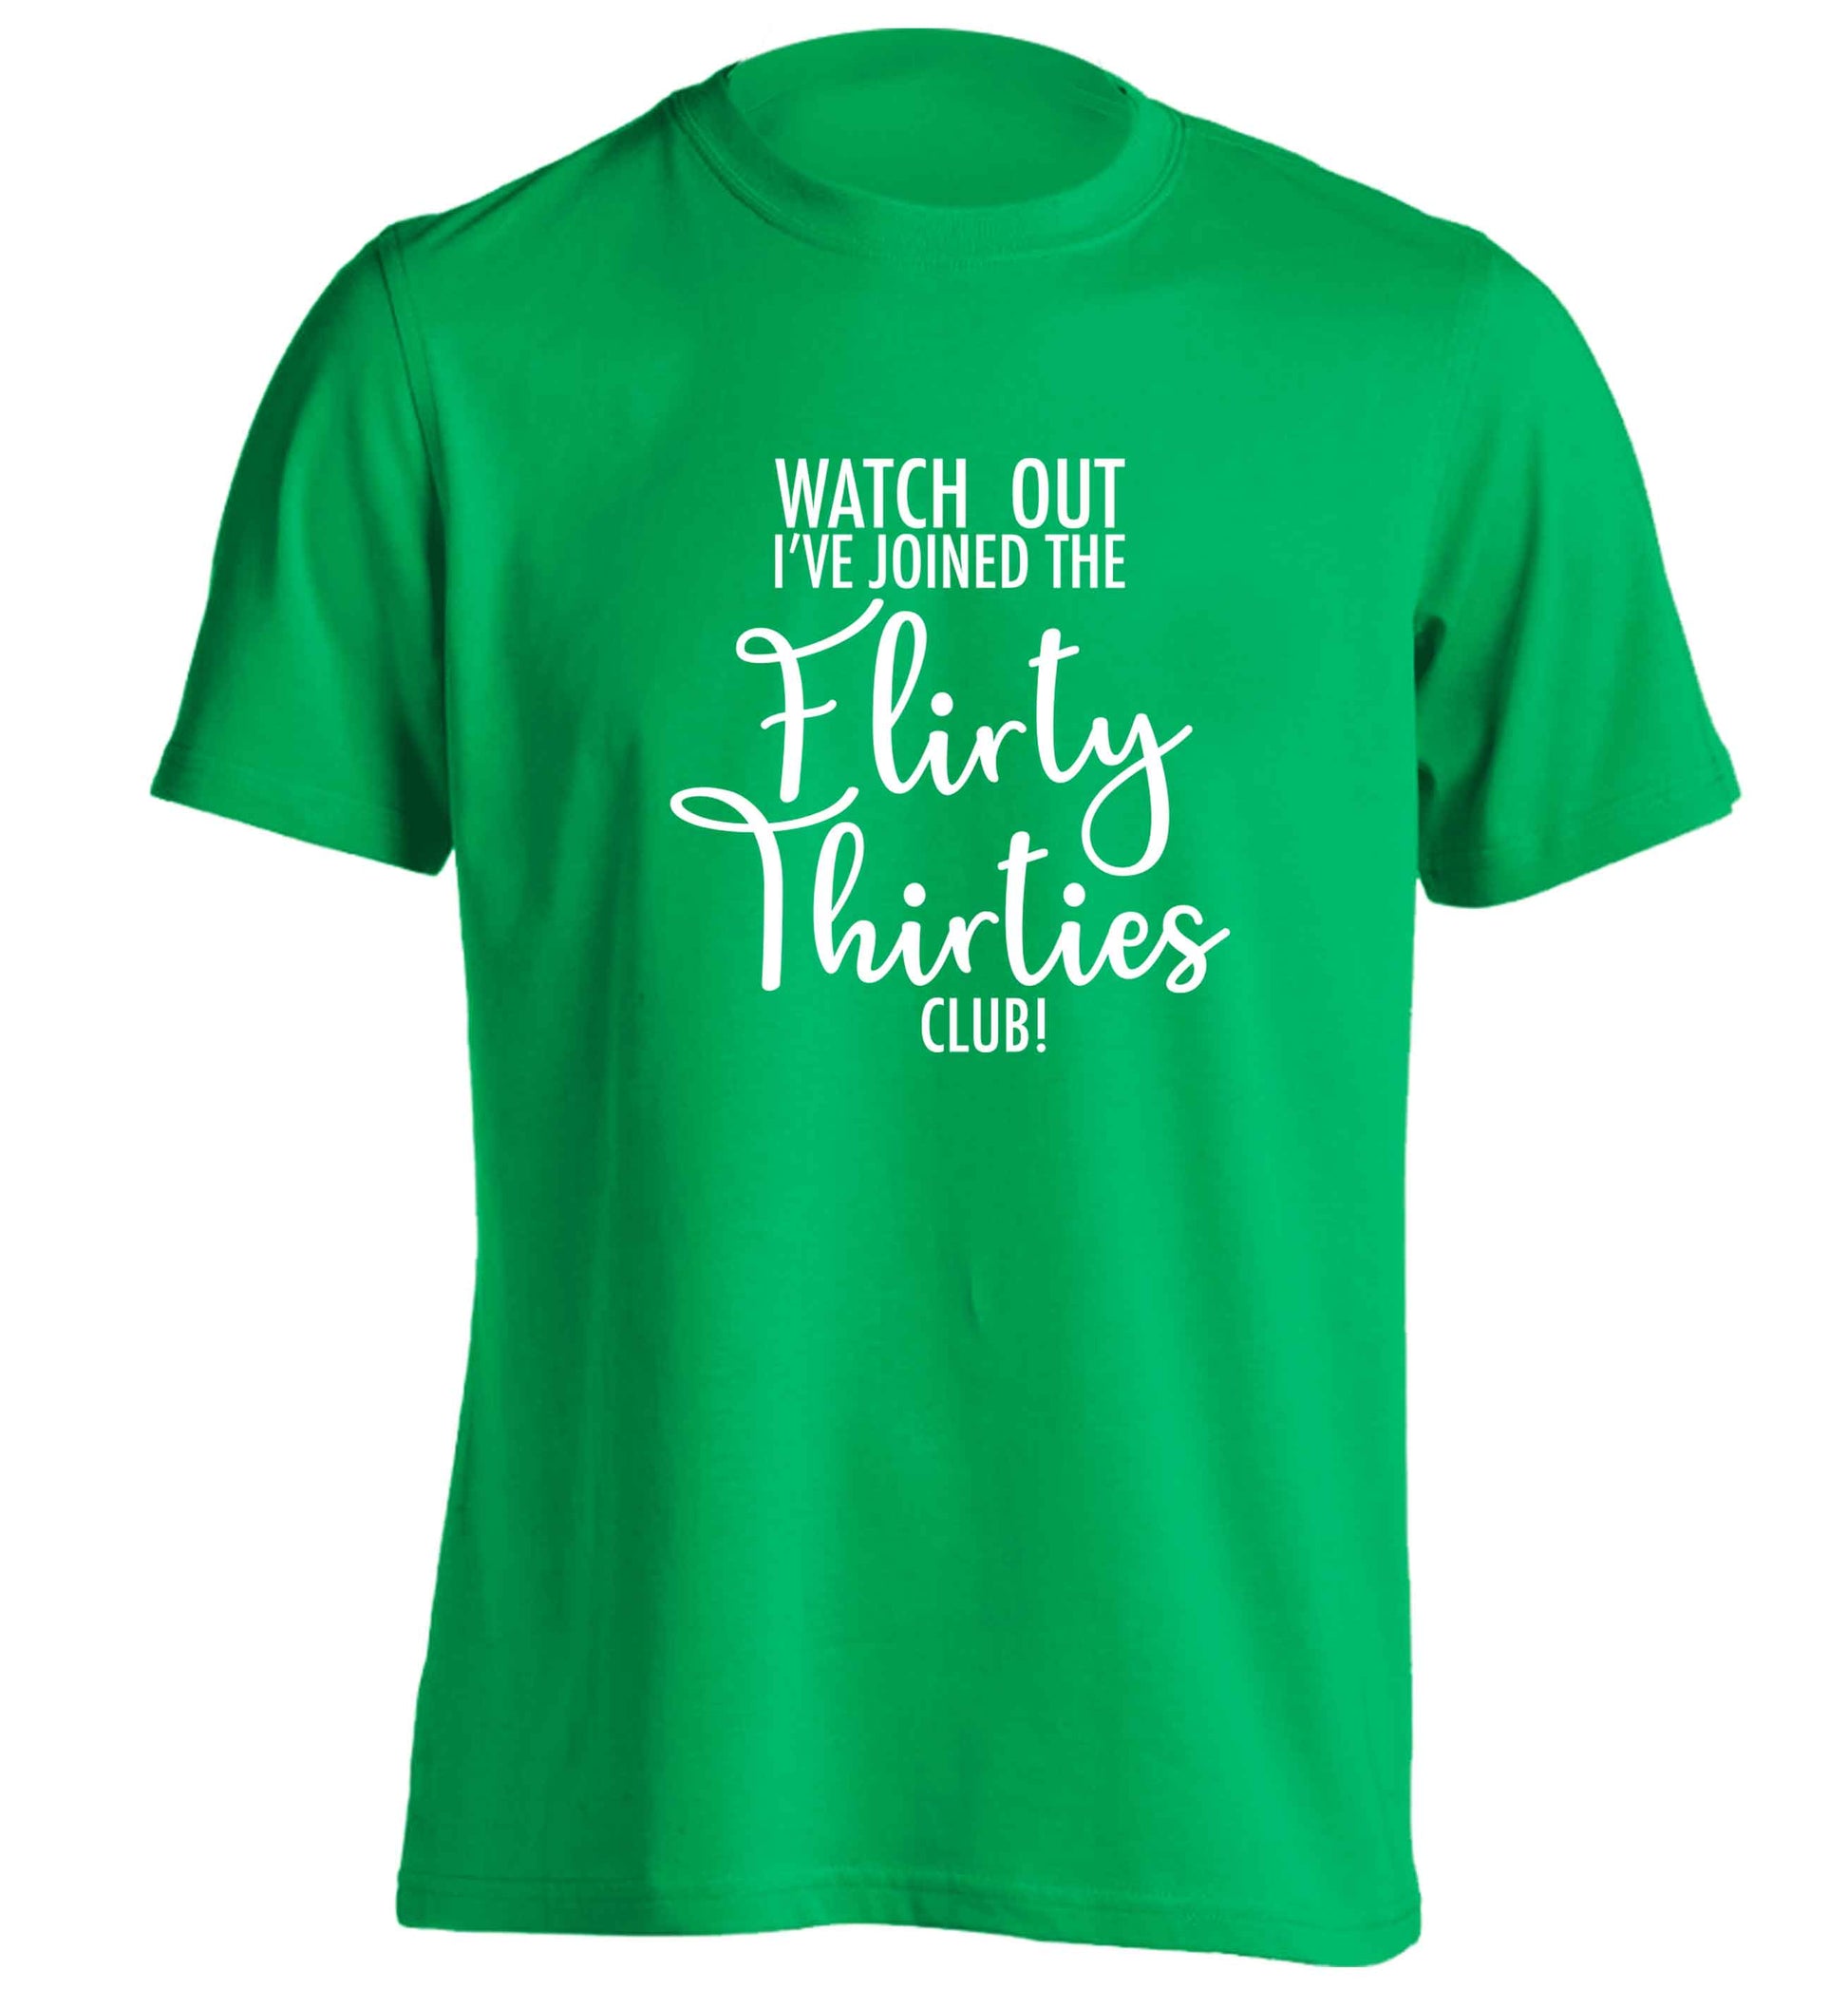 Watch out I've joined the flirty thirties club adults unisex green Tshirt 2XL